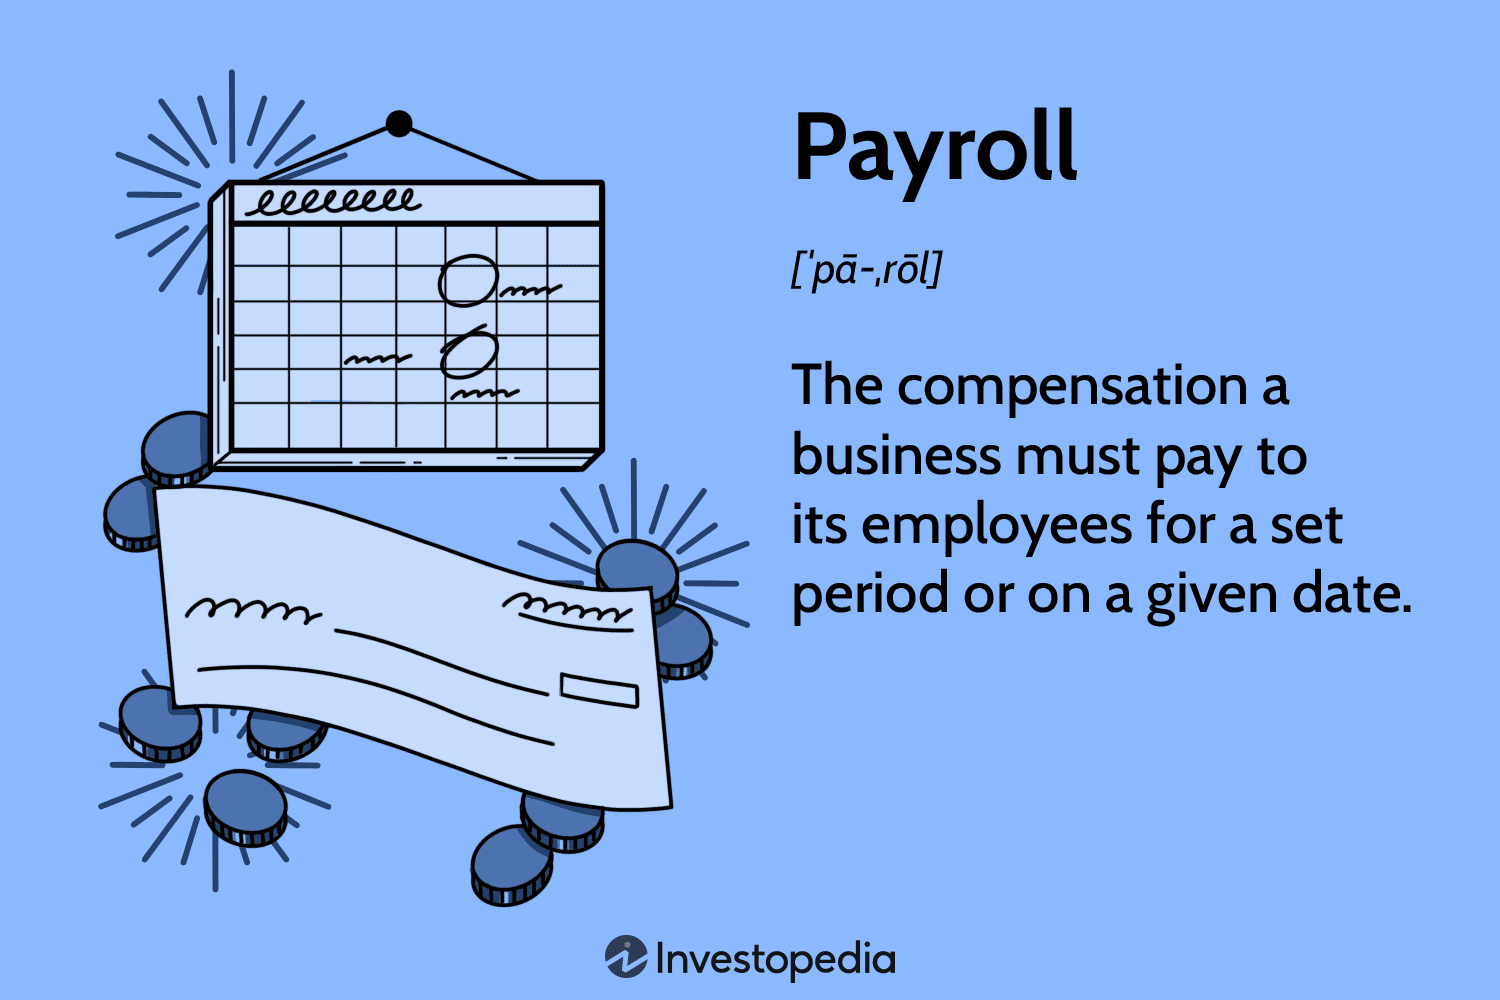 What are the steps in the payroll process?